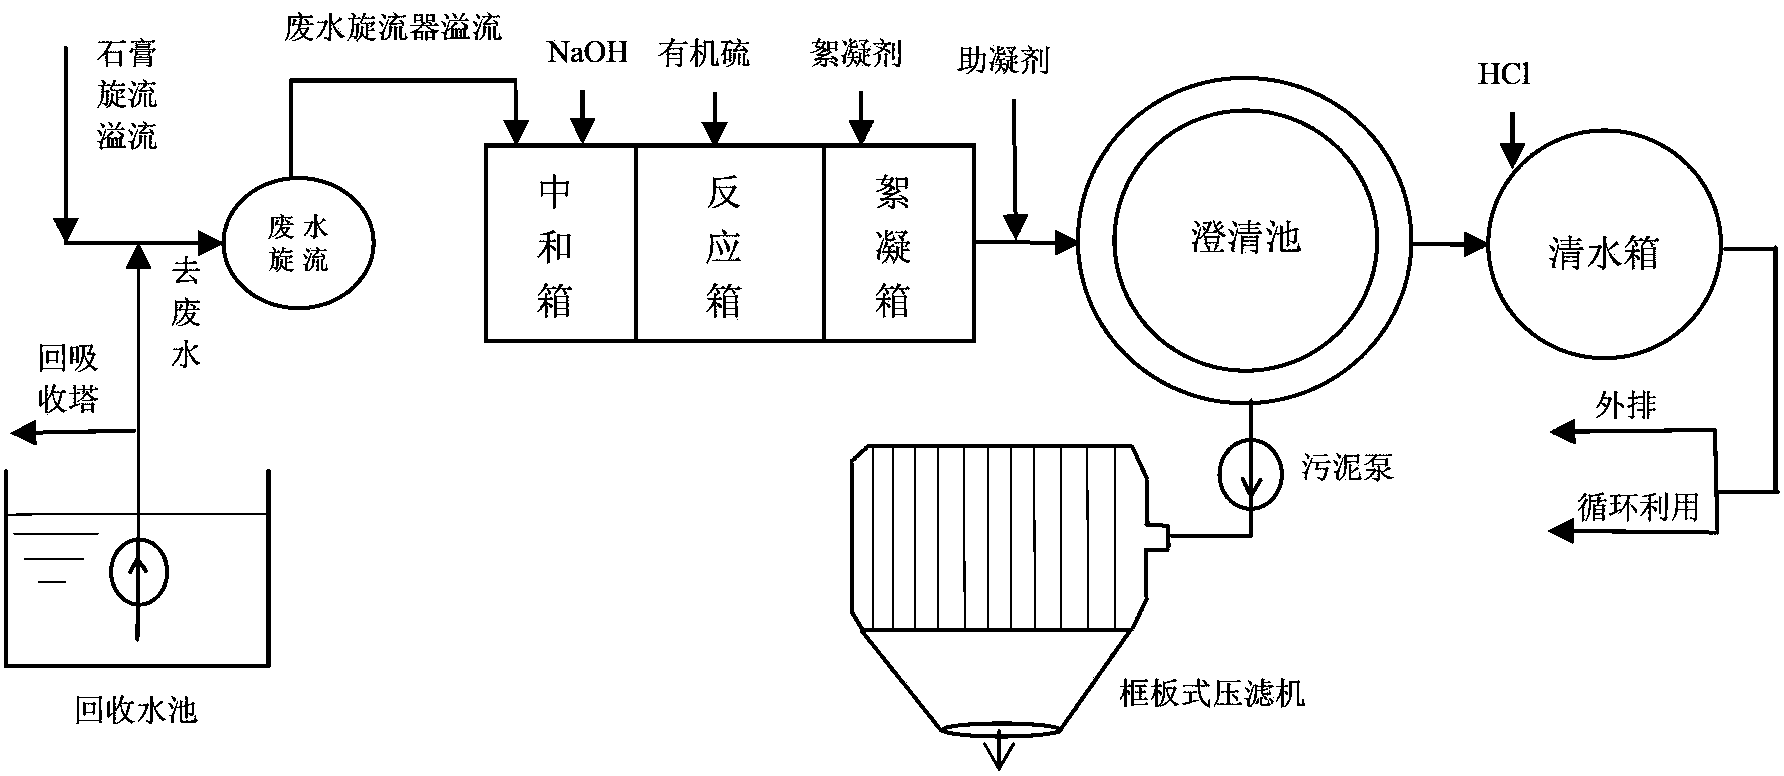 Novel wet flue gas desulfurization wastewater treatment method and system